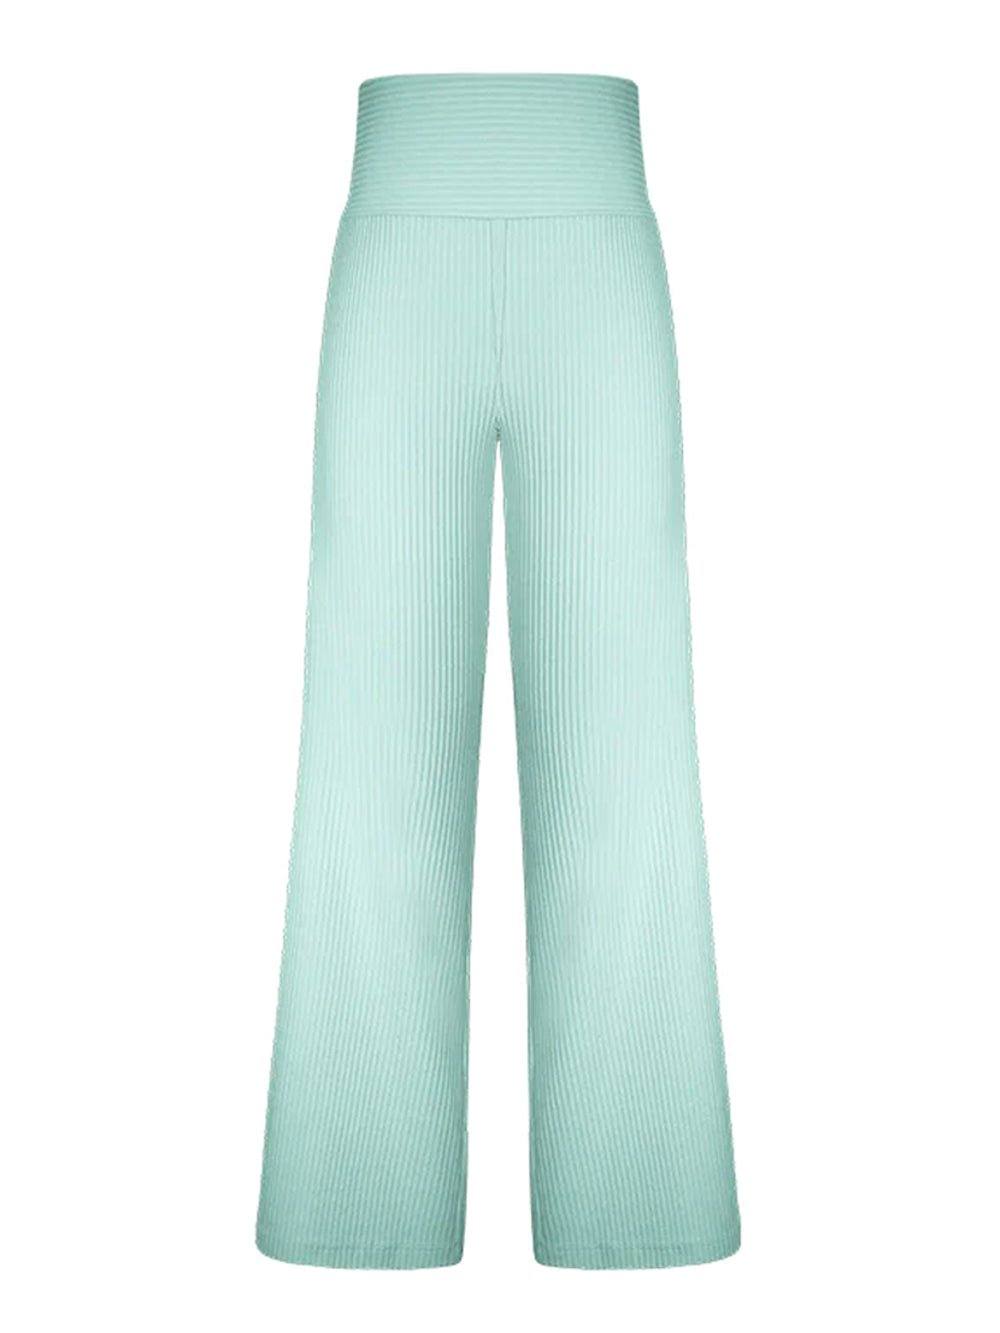 Straight Casual Pants - Mint Green - OCEAN MYSTERY